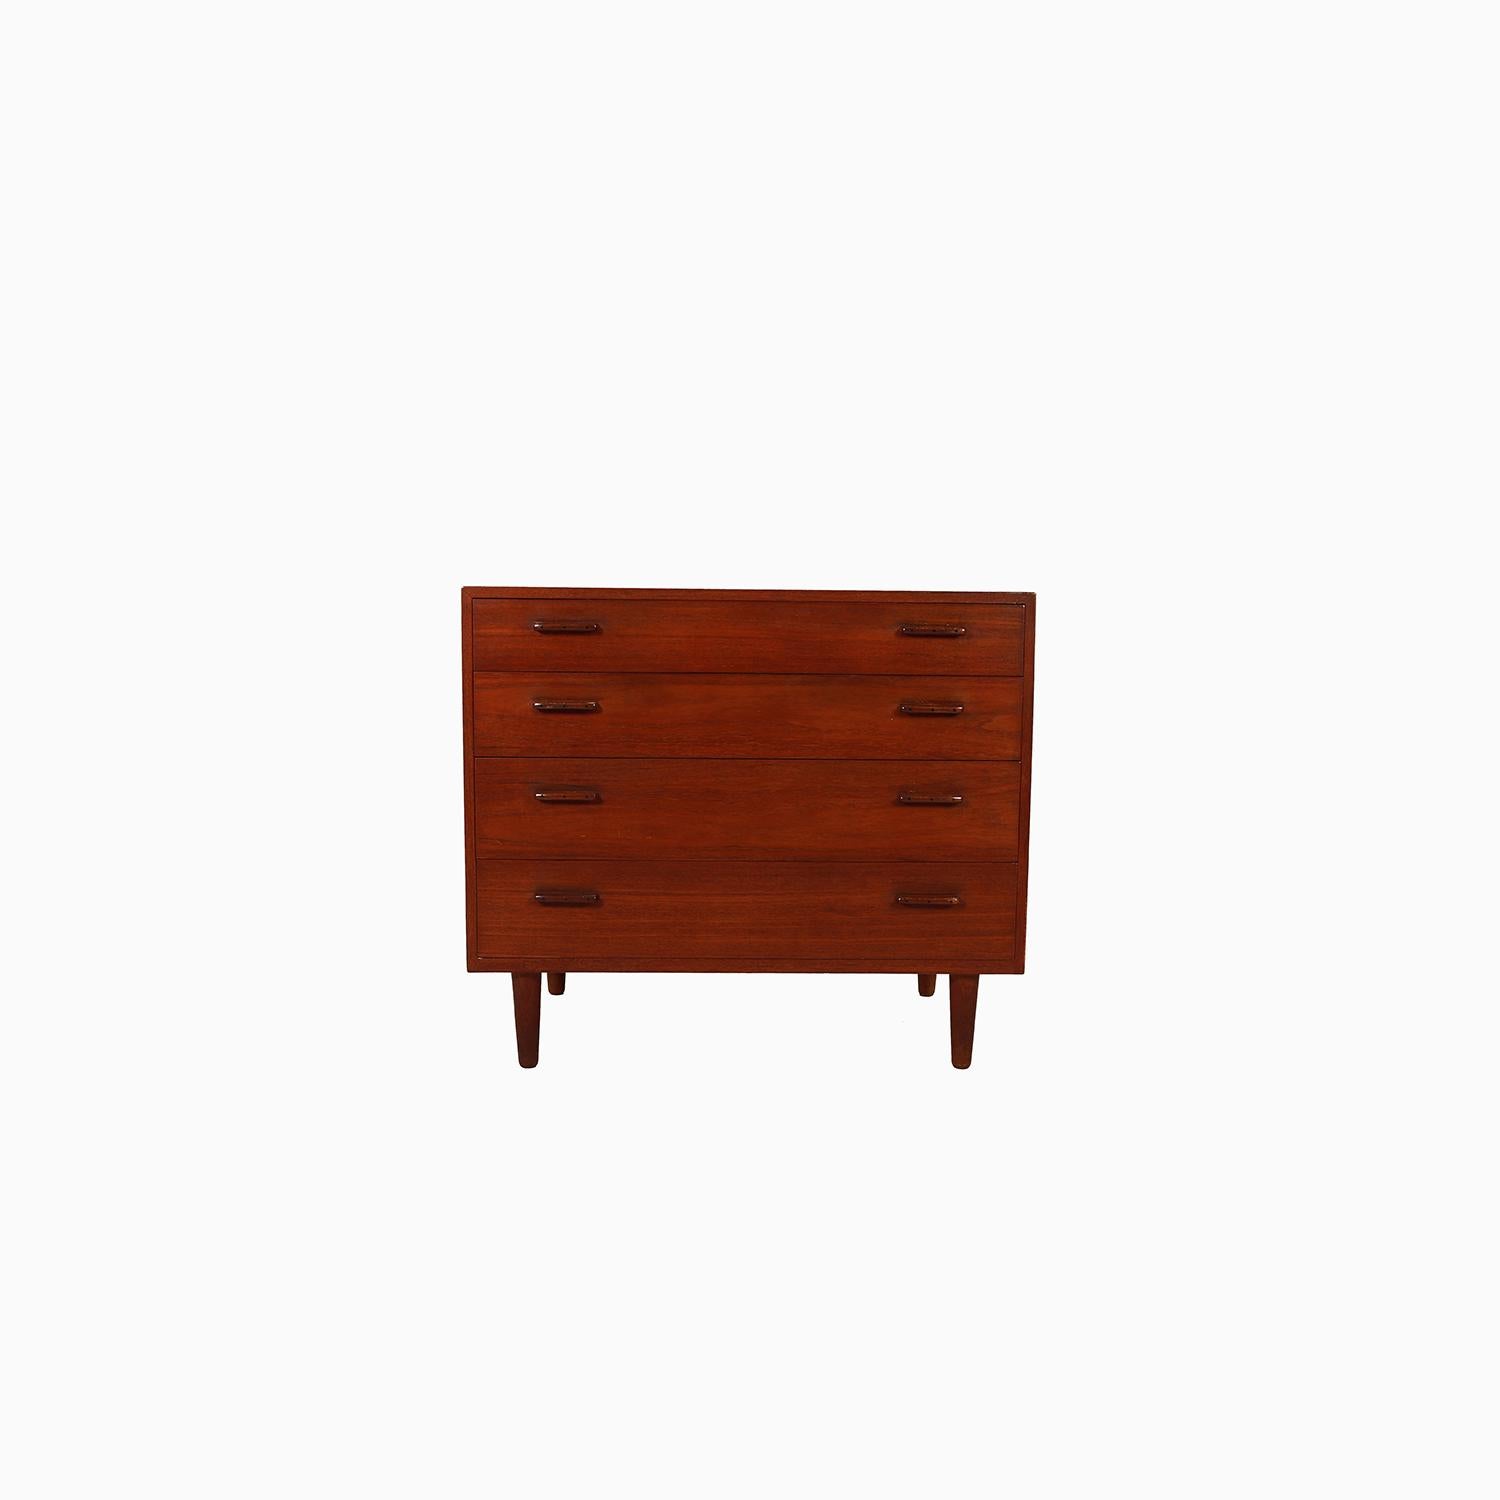 A minimal designed teak occasional chest by Erik Worts. A truly well made piece with hand finished details. Hand cut dovetails, inlayed rosewood and wedge tenon legs. A true representation of early Danish Modern quality cabinet making. Two